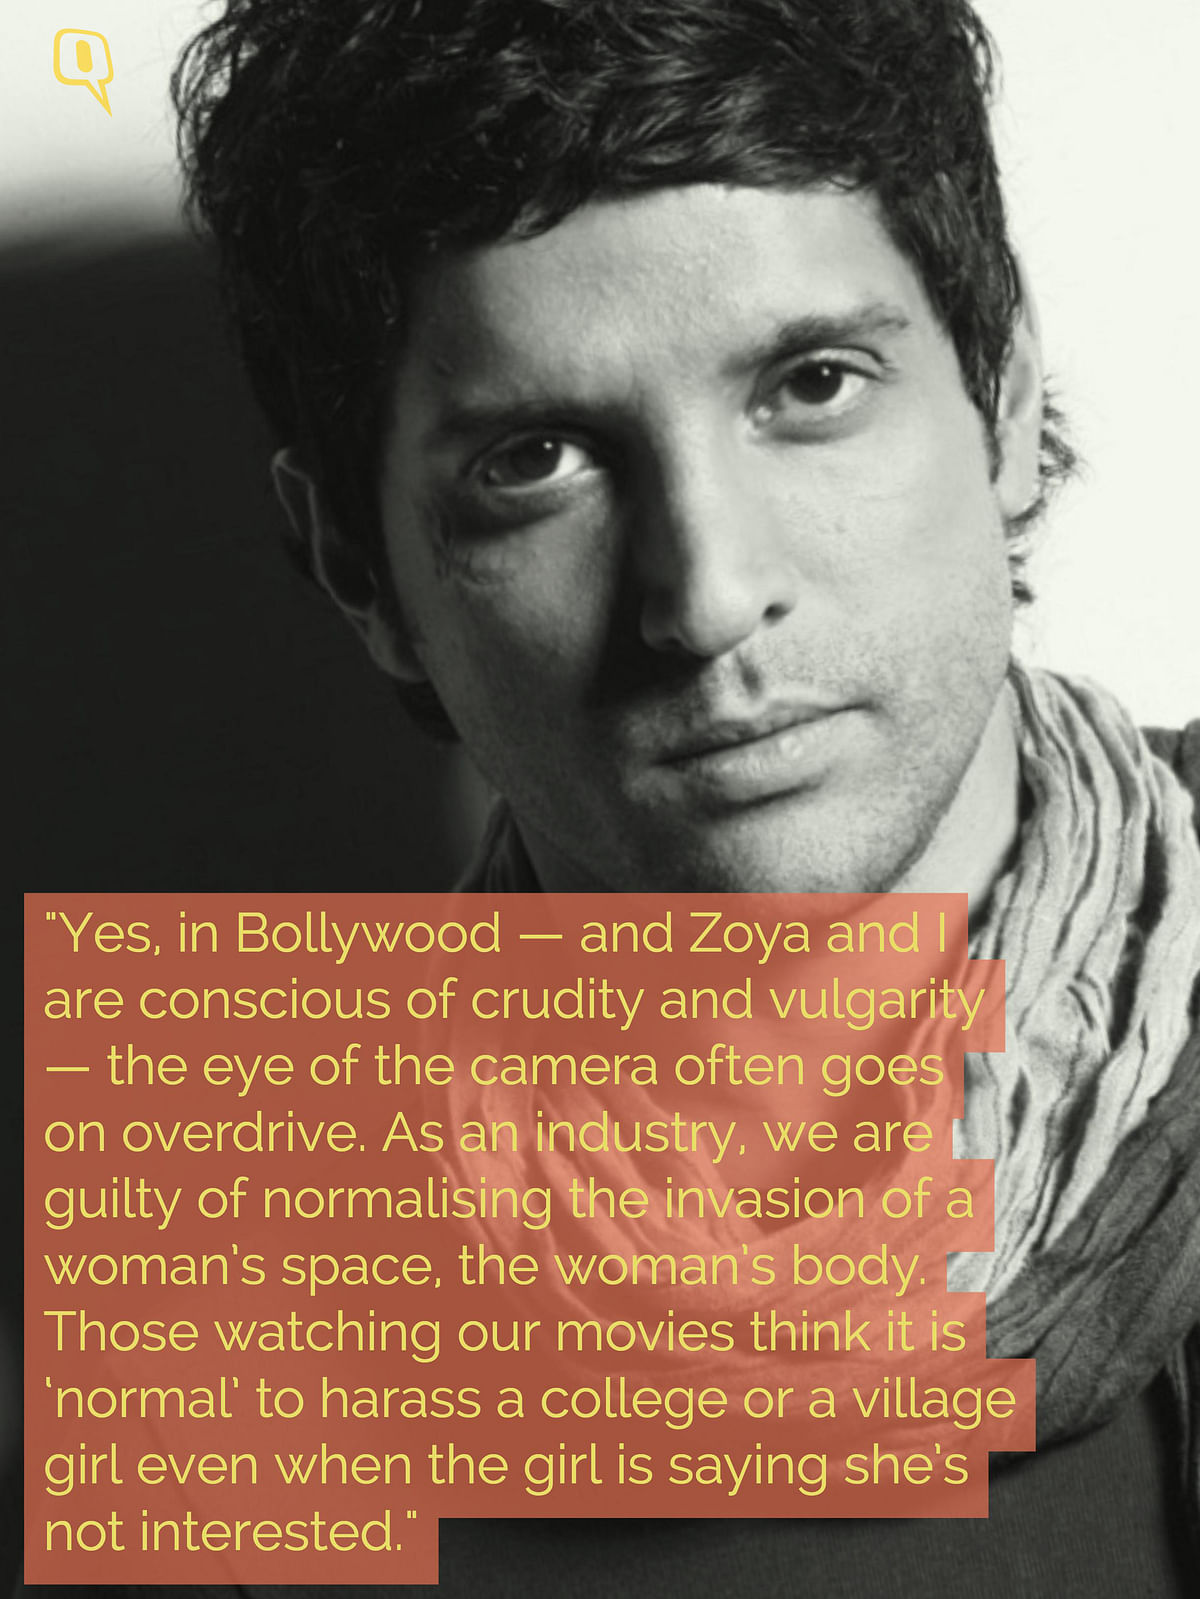 Farhan Akhtar points out the purpose of cinema as being more than just a form of entertainment.